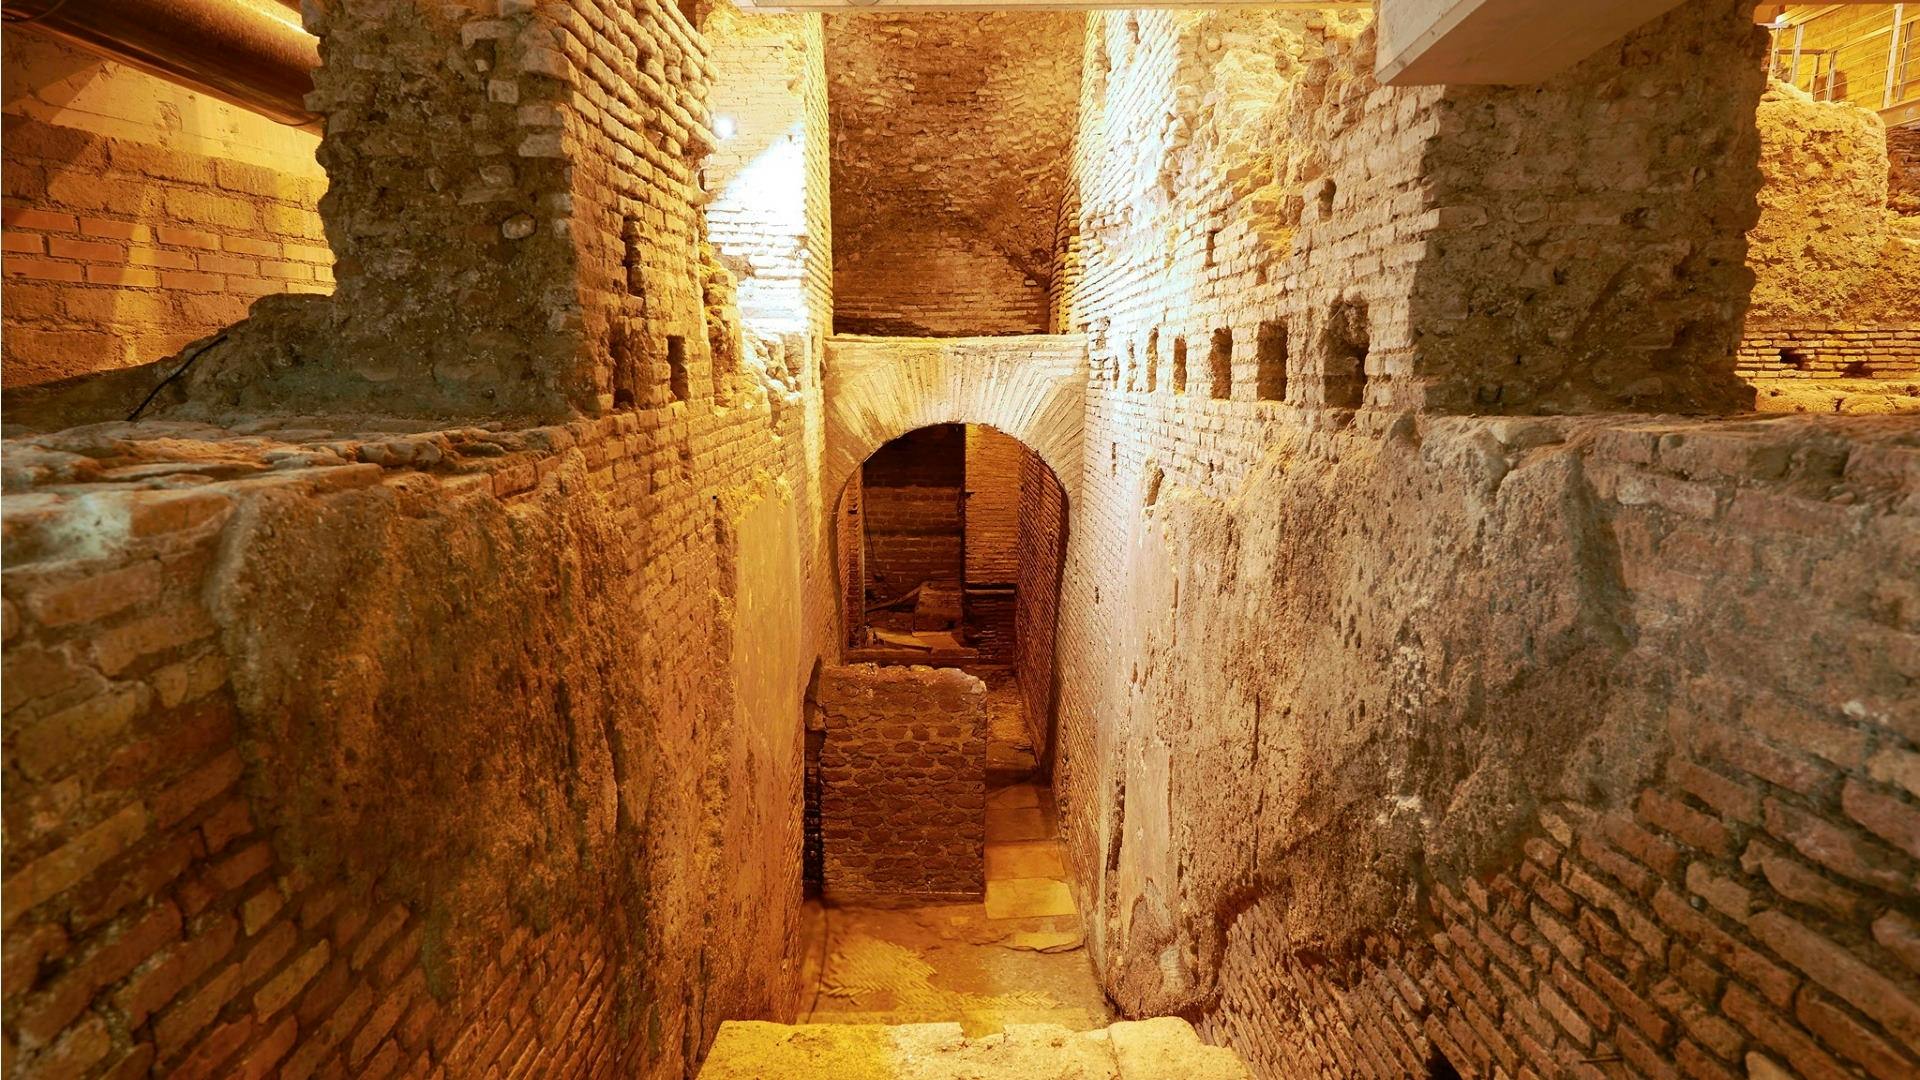 Rome's underground and piazzas guided walking tour